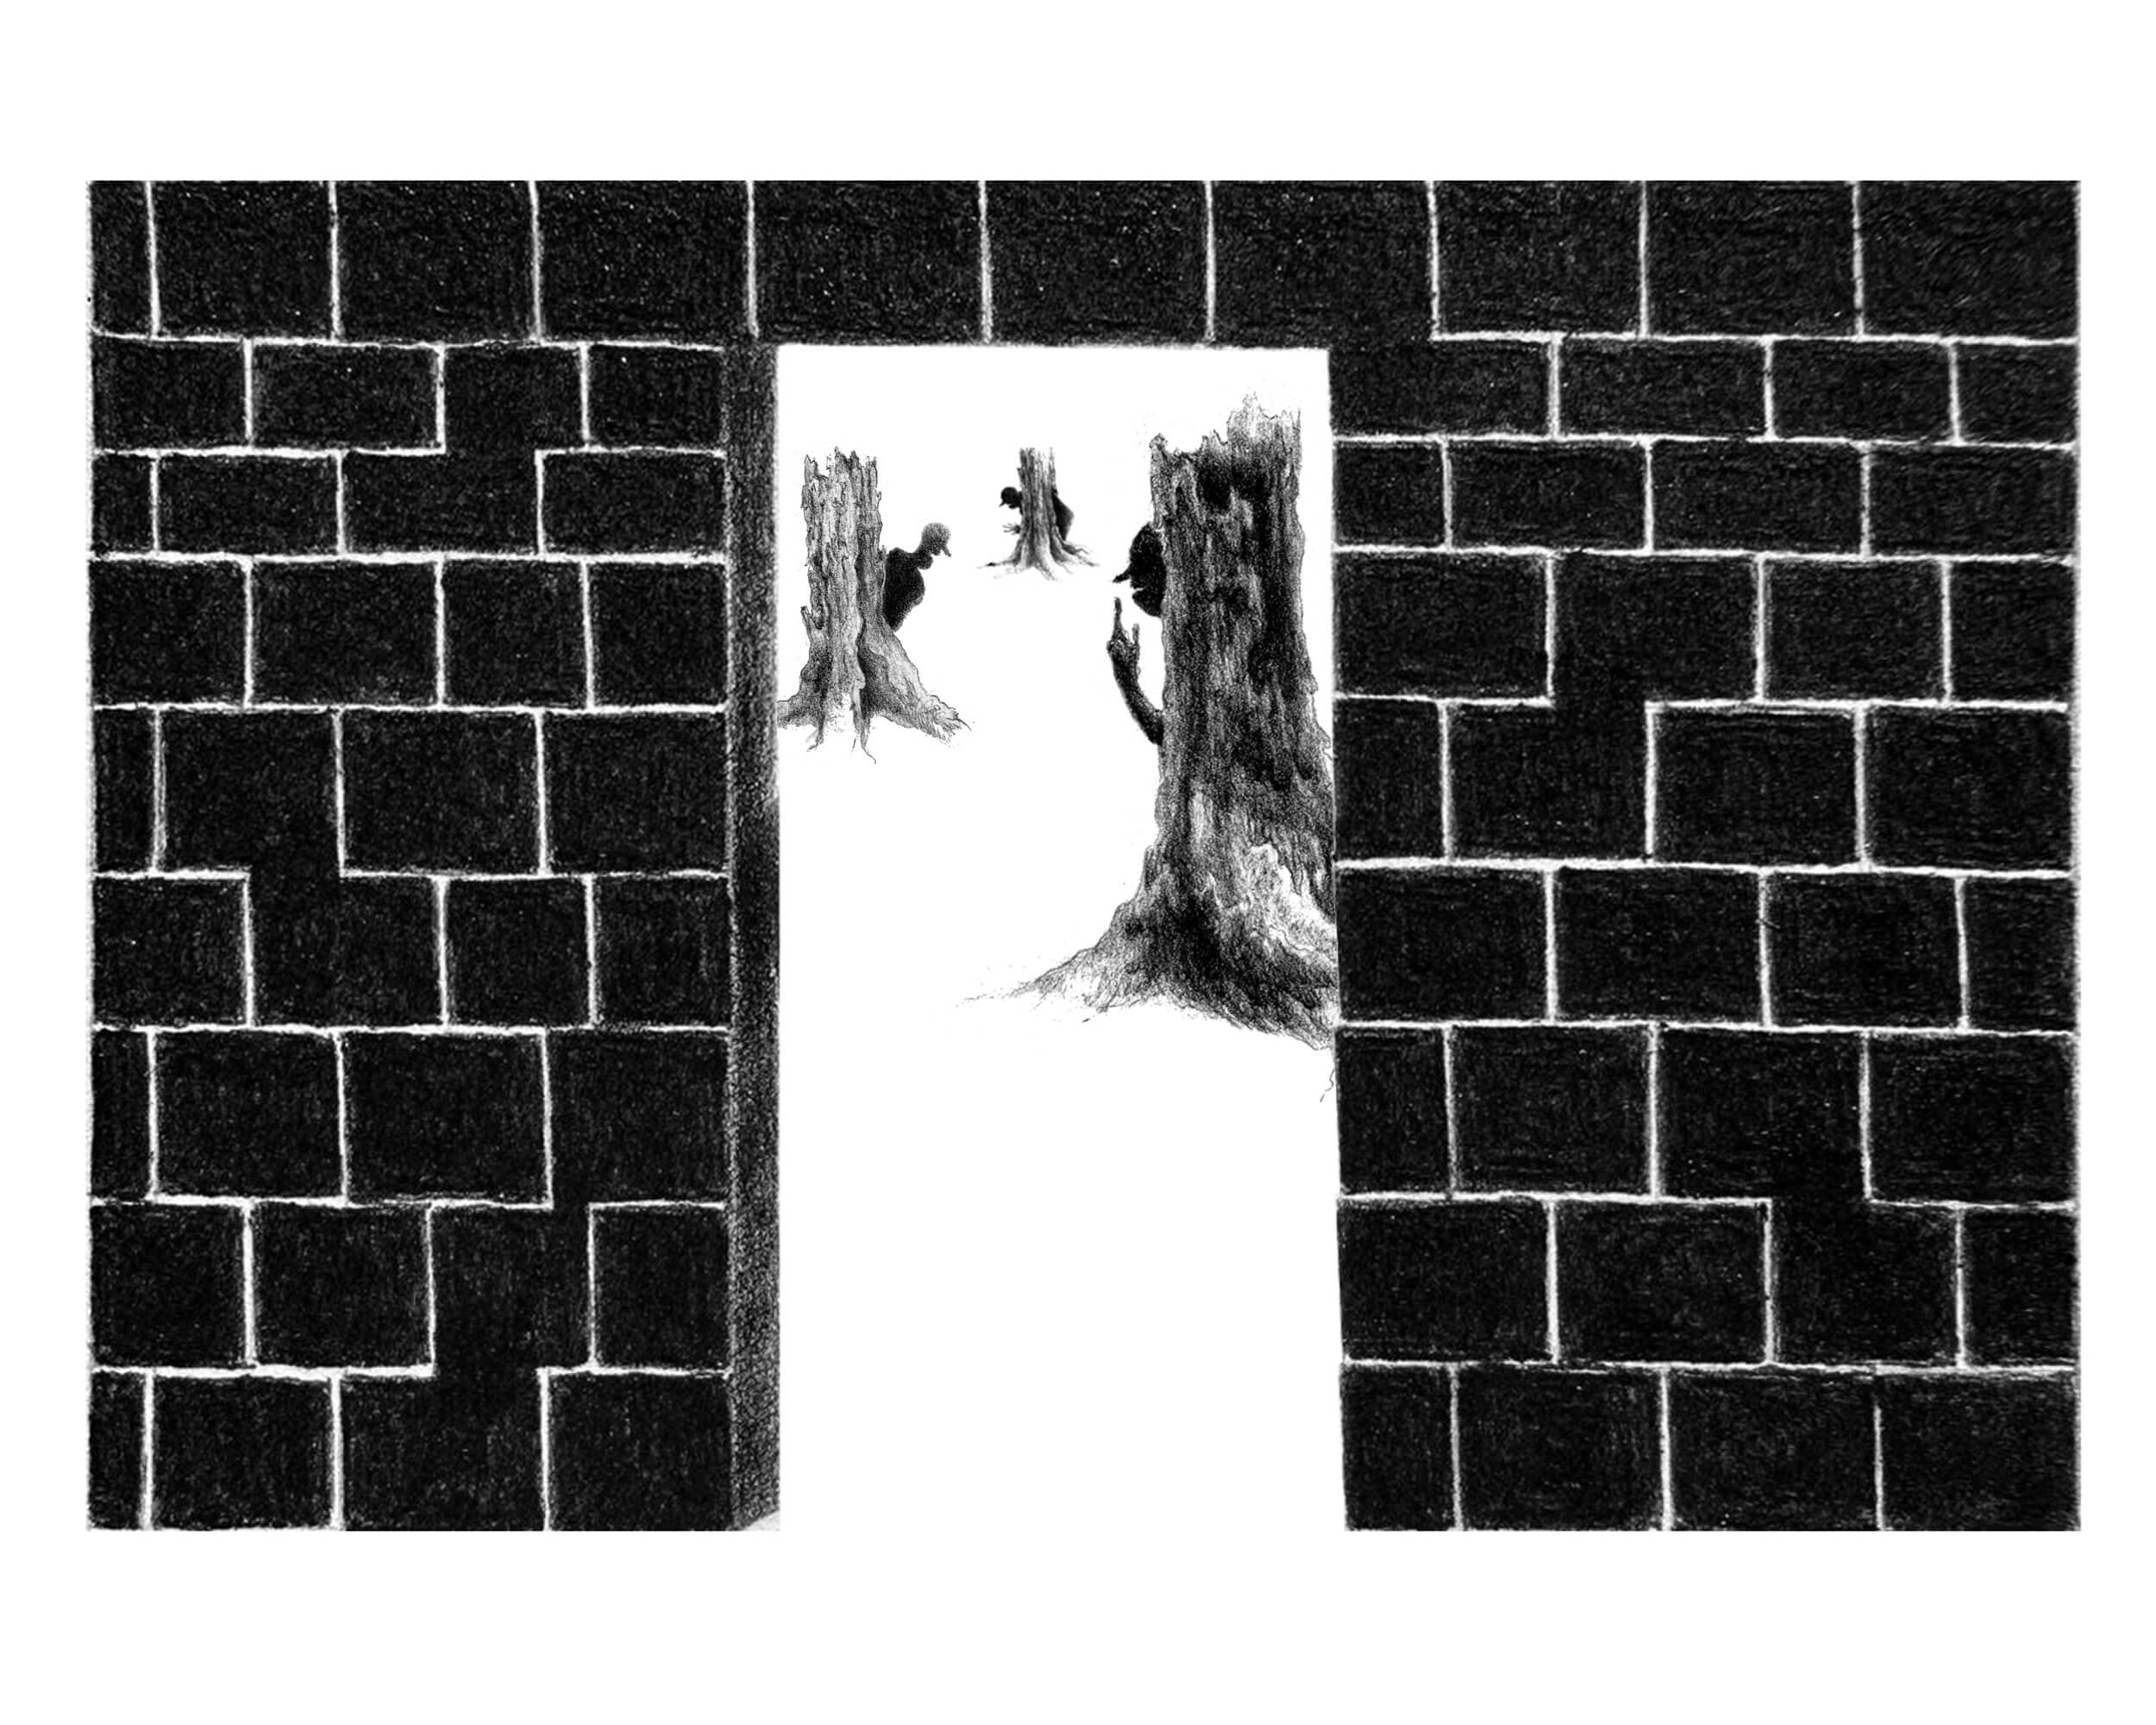 Scene 6:
The poster and doctor are gone. In their place stands a formidable wall and a gridded stone threshold. 
Through the doorway, at first there appears nothing but a blank white space. But the x-ray widget reveals three mischievous shadow figures peering out from behind rotting tree stumps. One holds up a hand to hush the others.